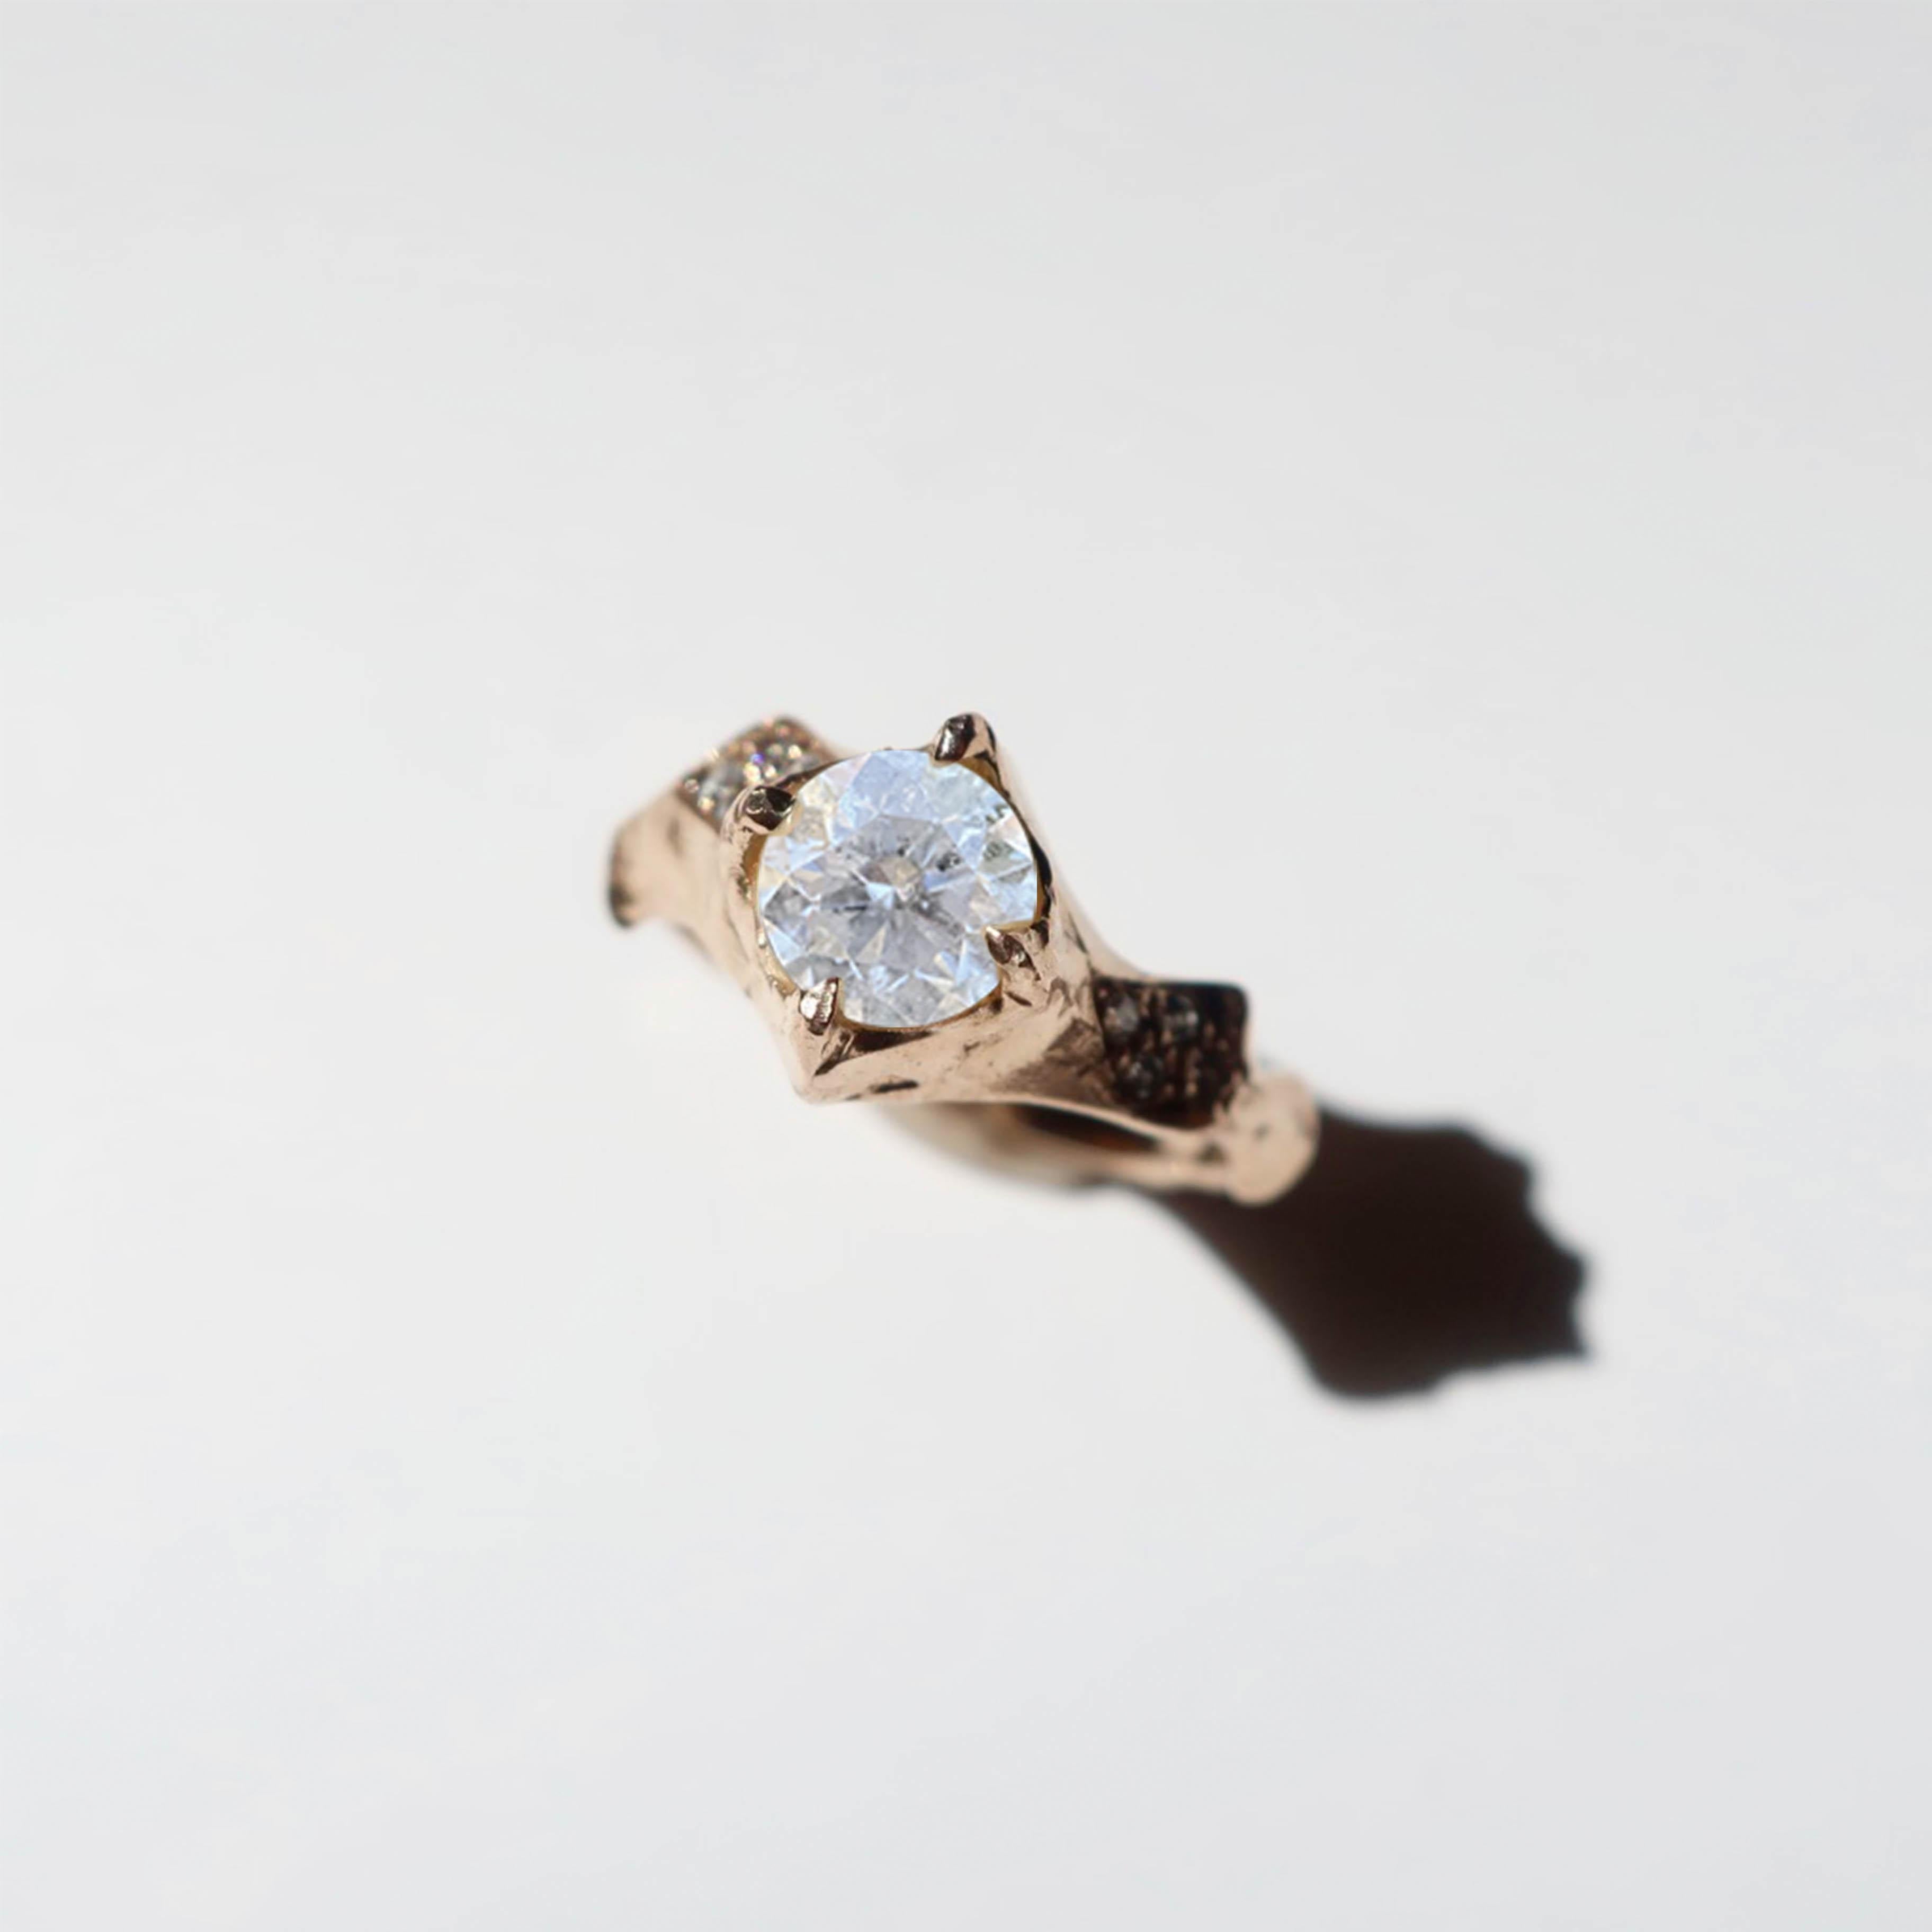 This gorgeous ring is cast in 18k yellow gold with a hand selected diamond about 1 carat in weight. A 5.8mm round brilliant cut white diamond is featured in this hand crafted ring.




2-4 weeks to produce